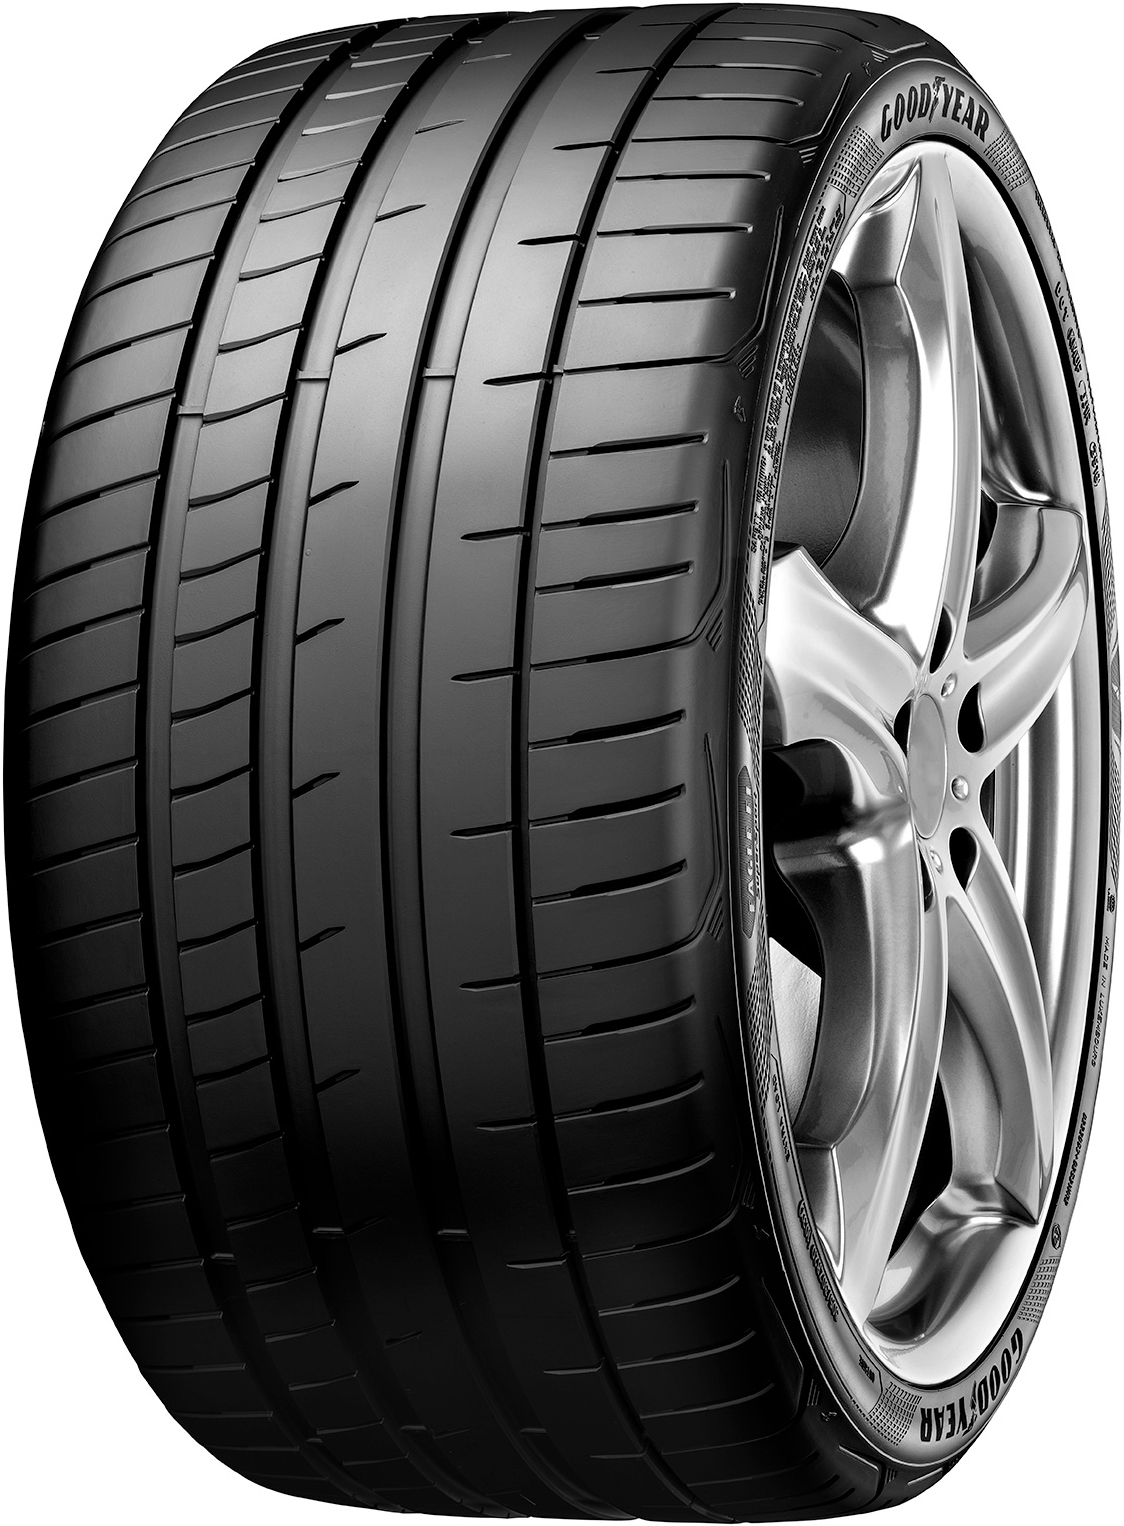 Anvelope auto GOODYEAR F1 SUPERSPORT XL FP 255/40 R19 100Y